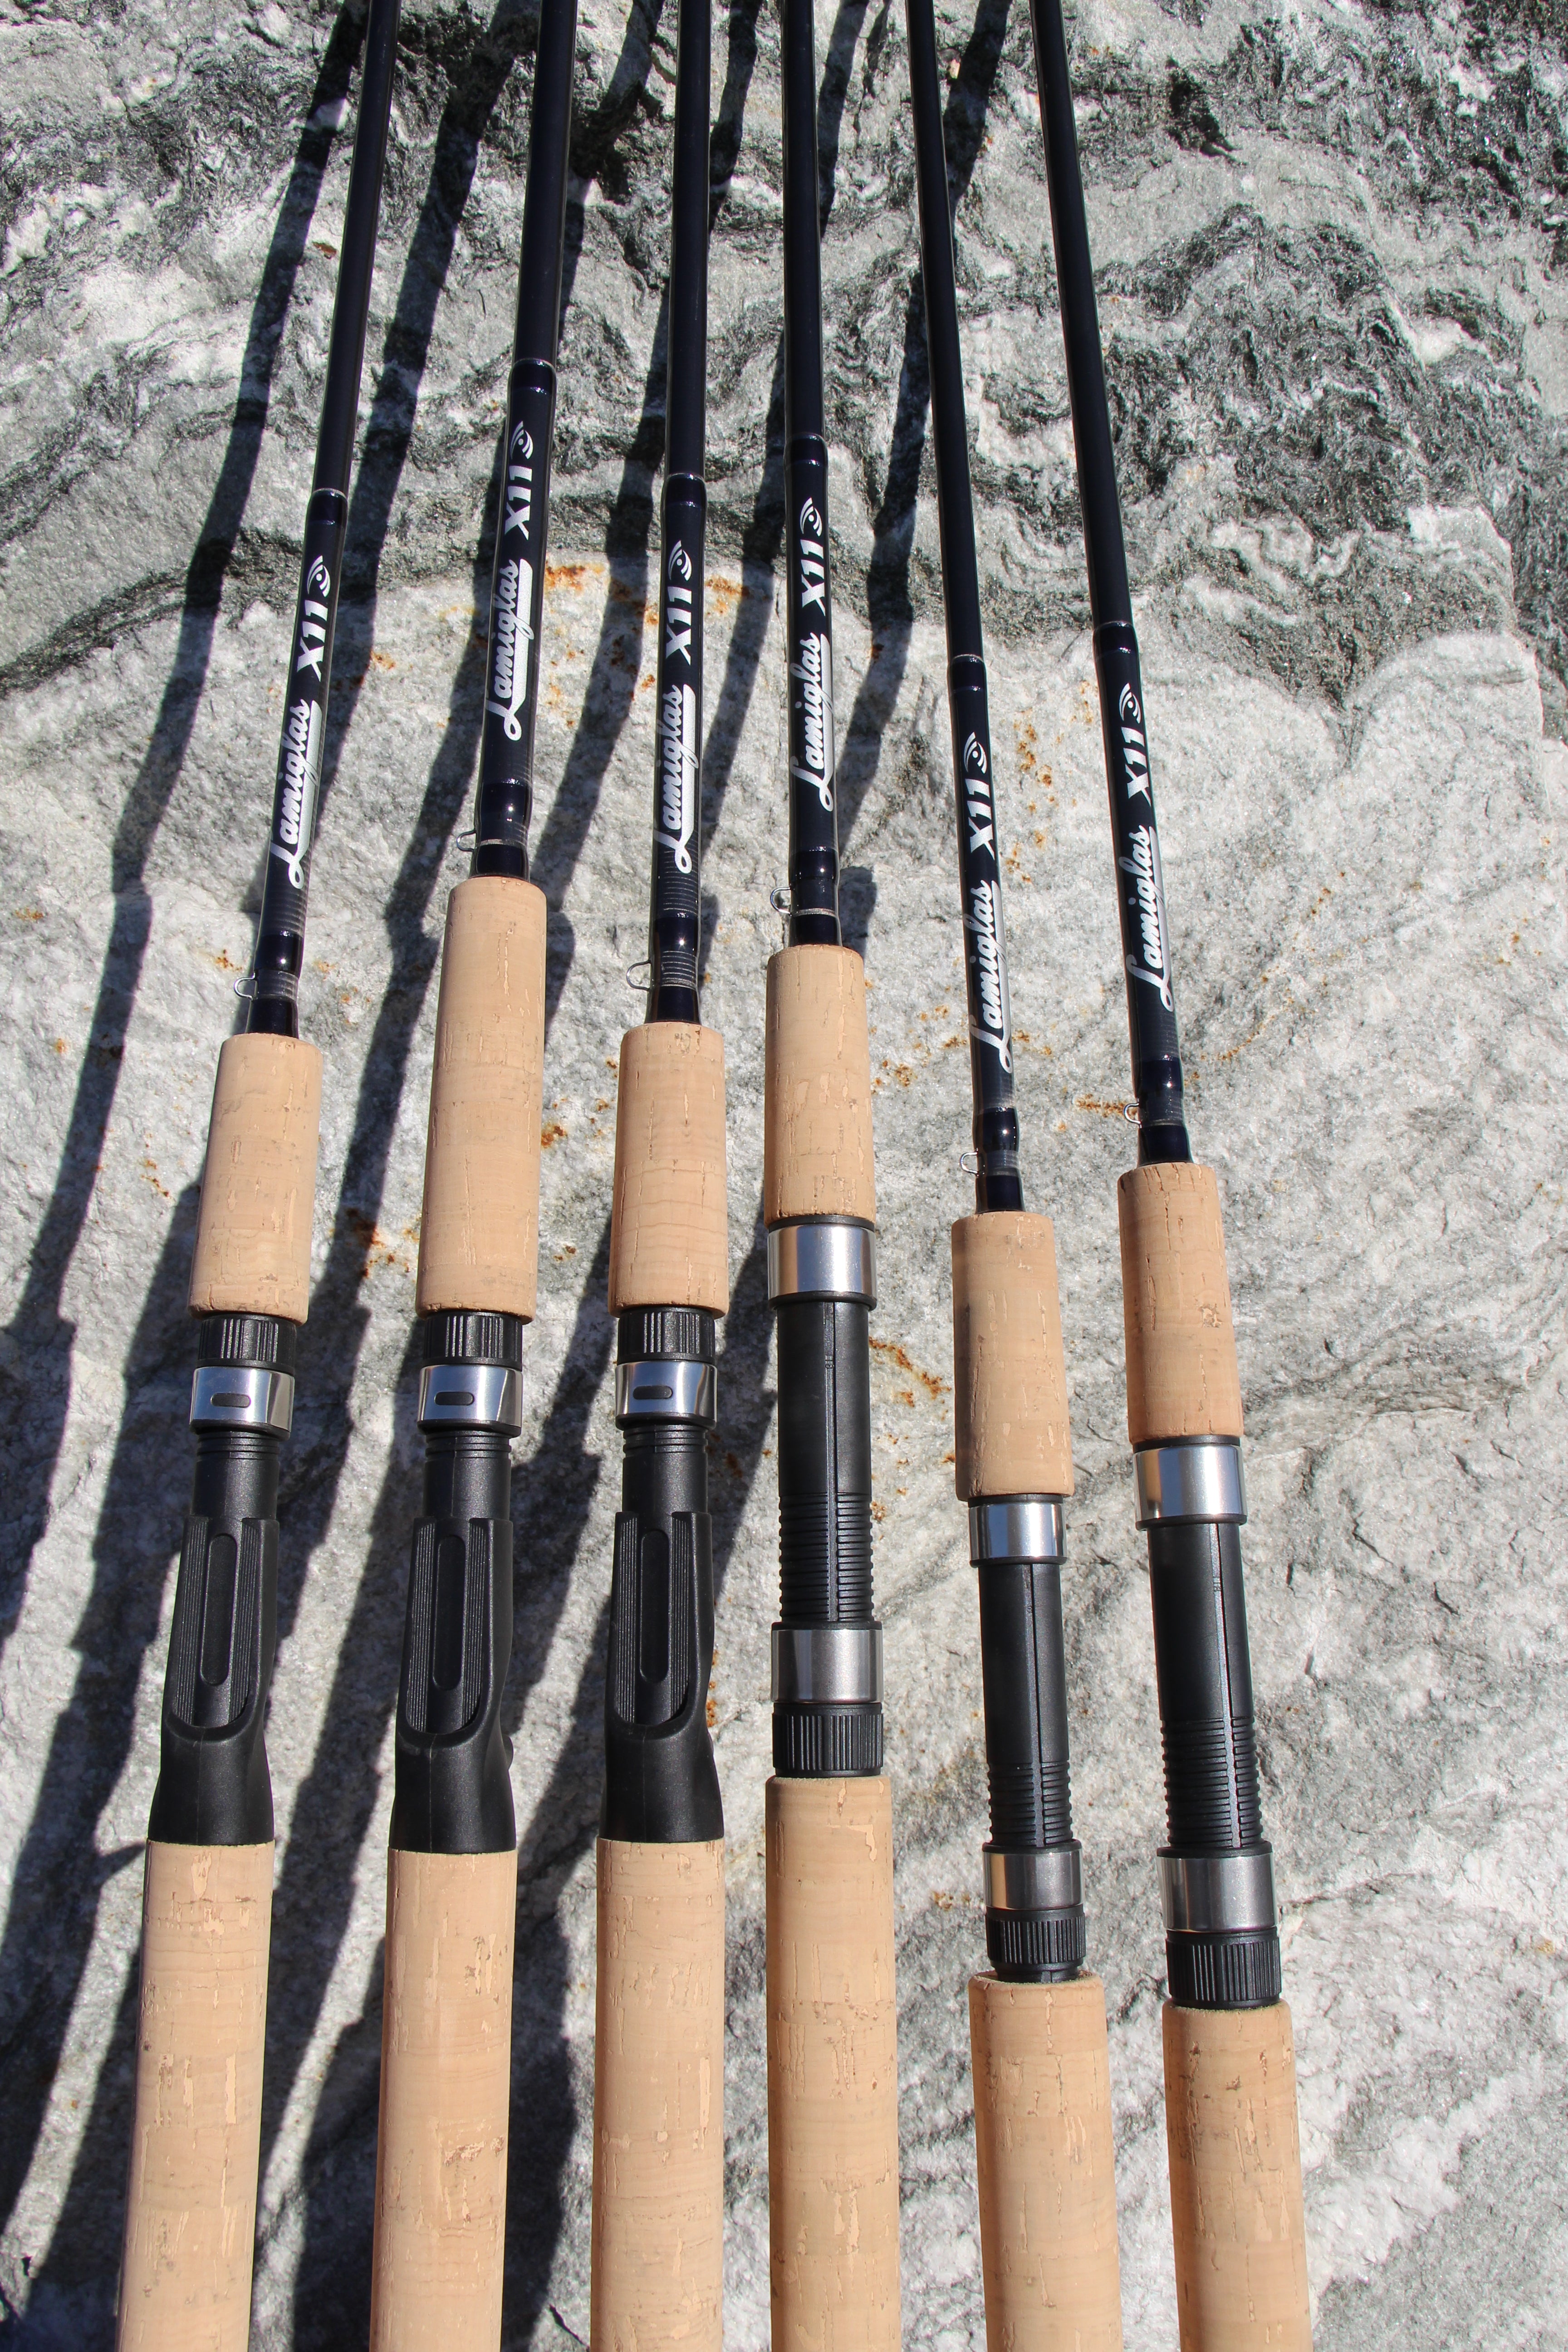 Lamiglas - New line of Rods for Lamiglas. B.C. Series. CA 10 MC 10' 8-17#  (With Trigger) CA 106 MHC 10' 6 12-20# (With Trigger) CA 106 HC 10' 6  15-30 (No